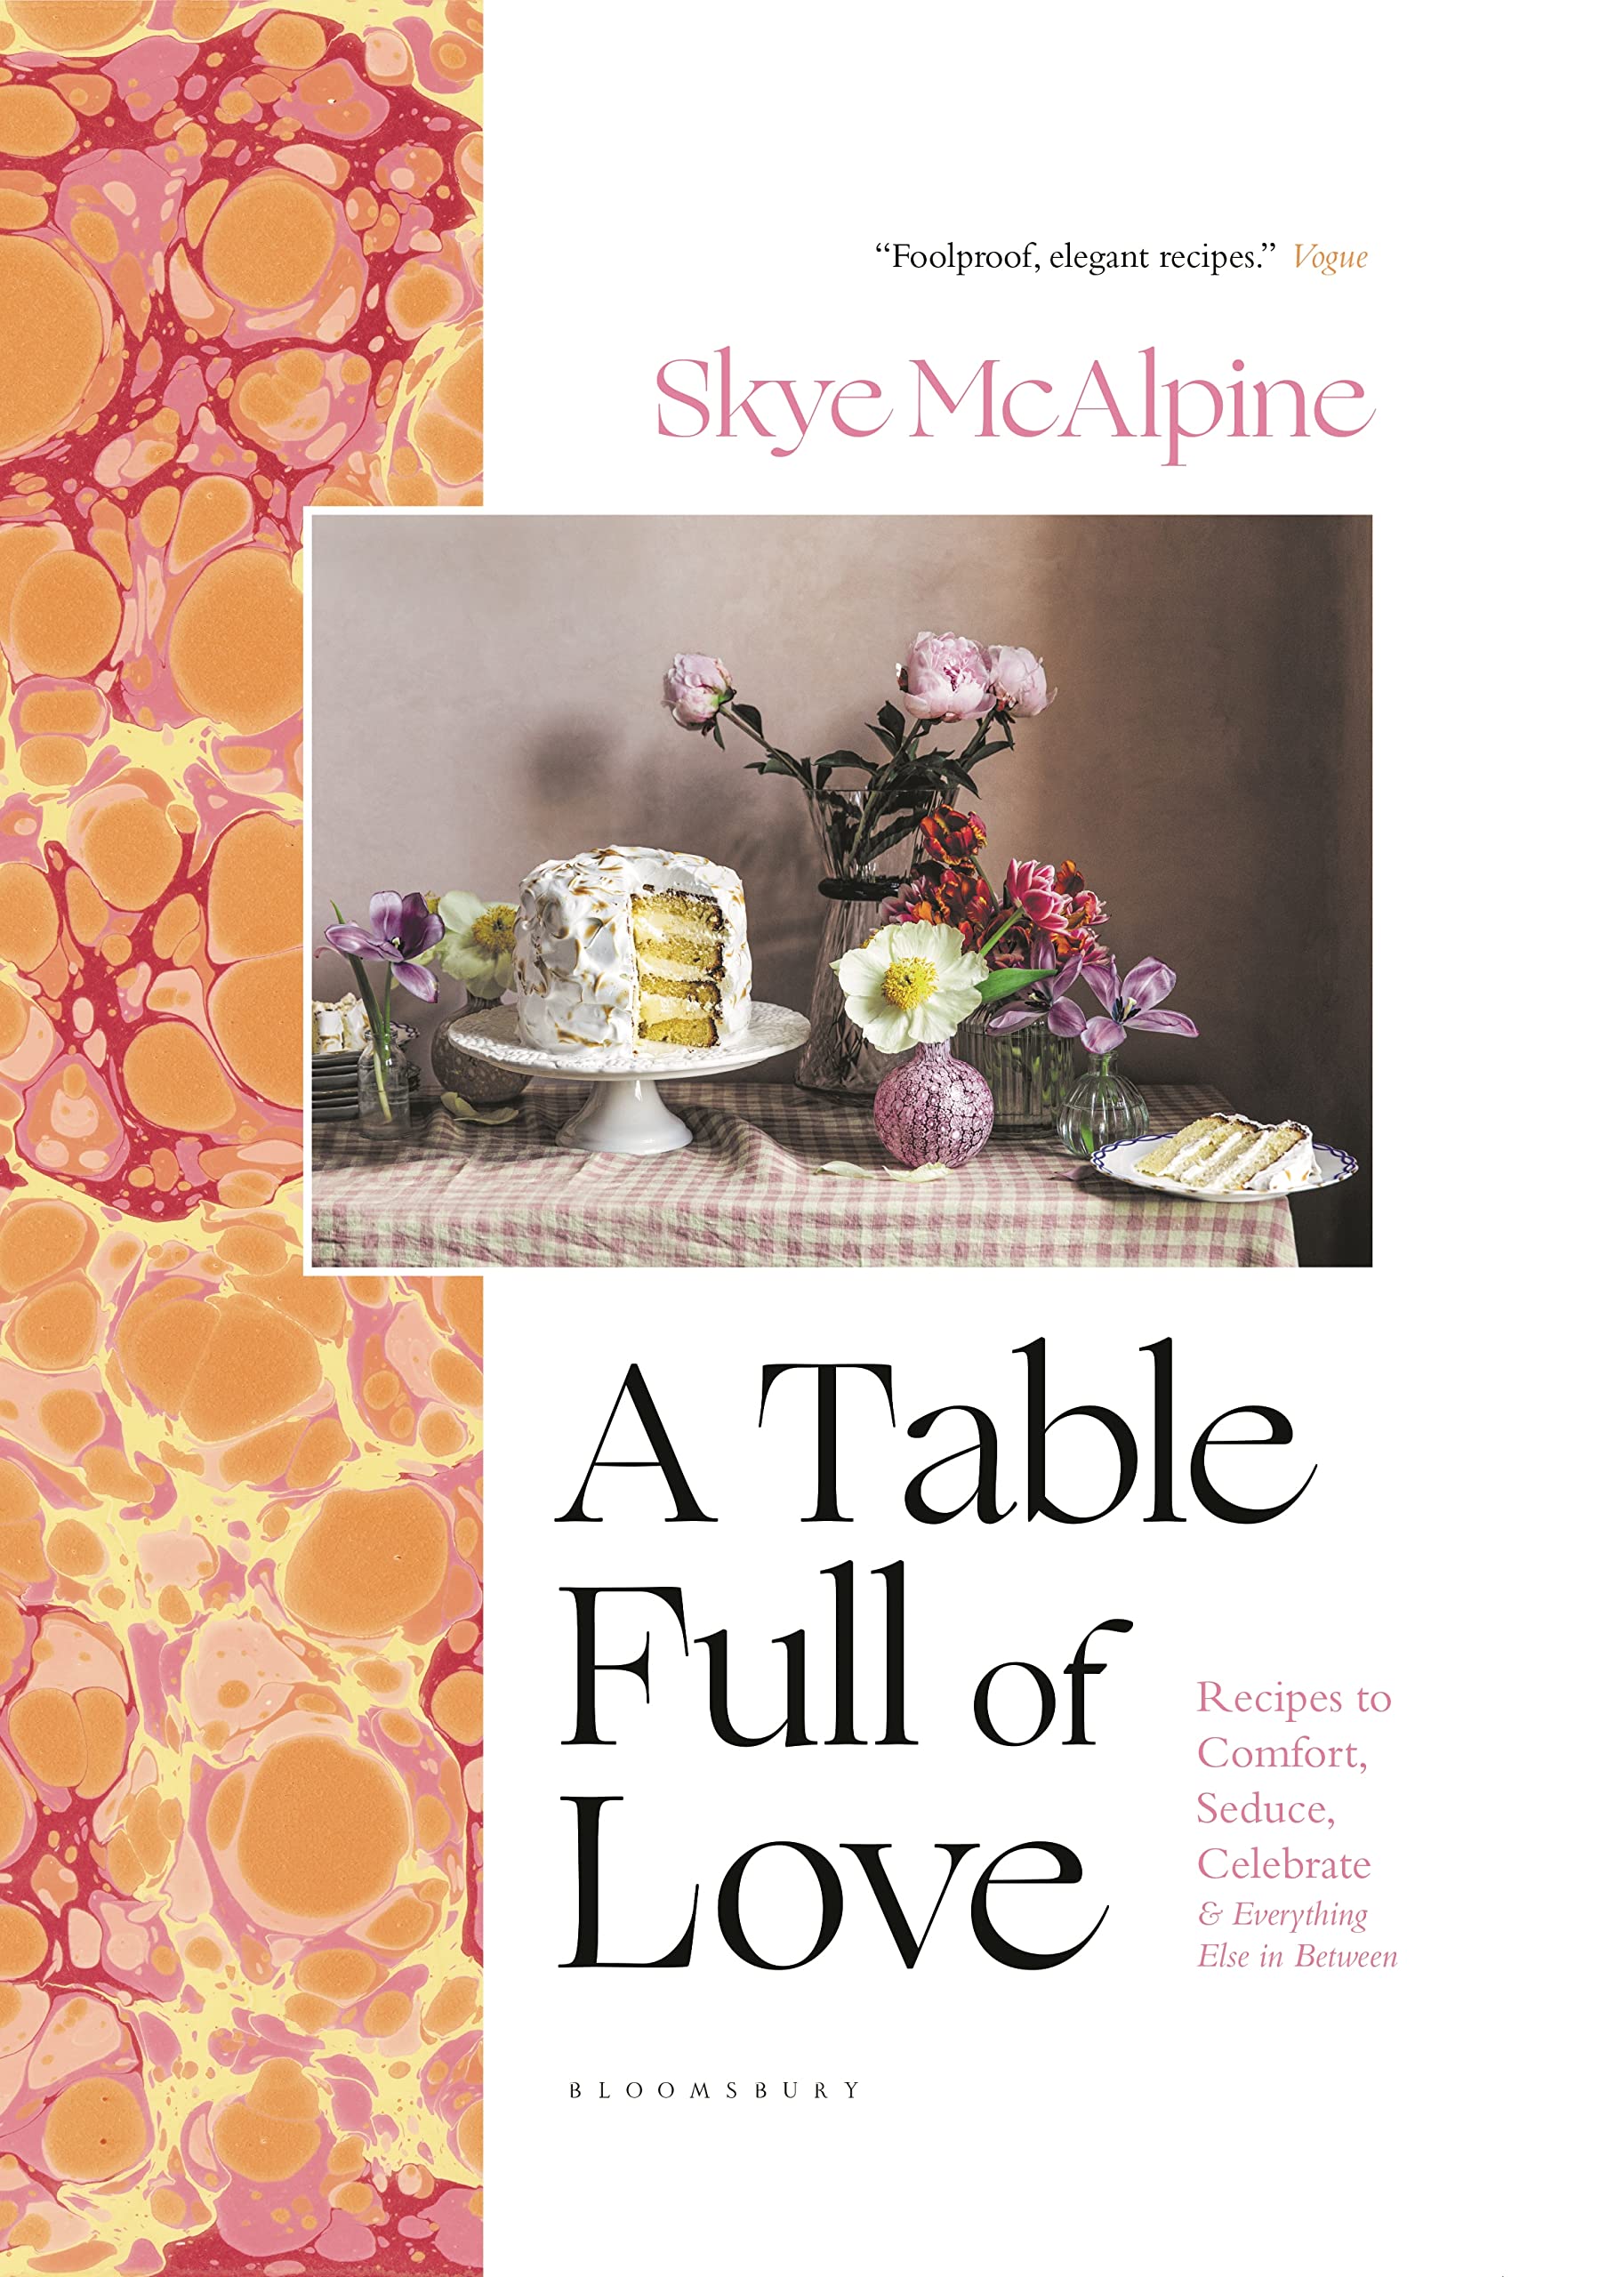 A Table Full of Love: Recipes to Comfort, Seduce, and Celebrate & Everything Else In Between